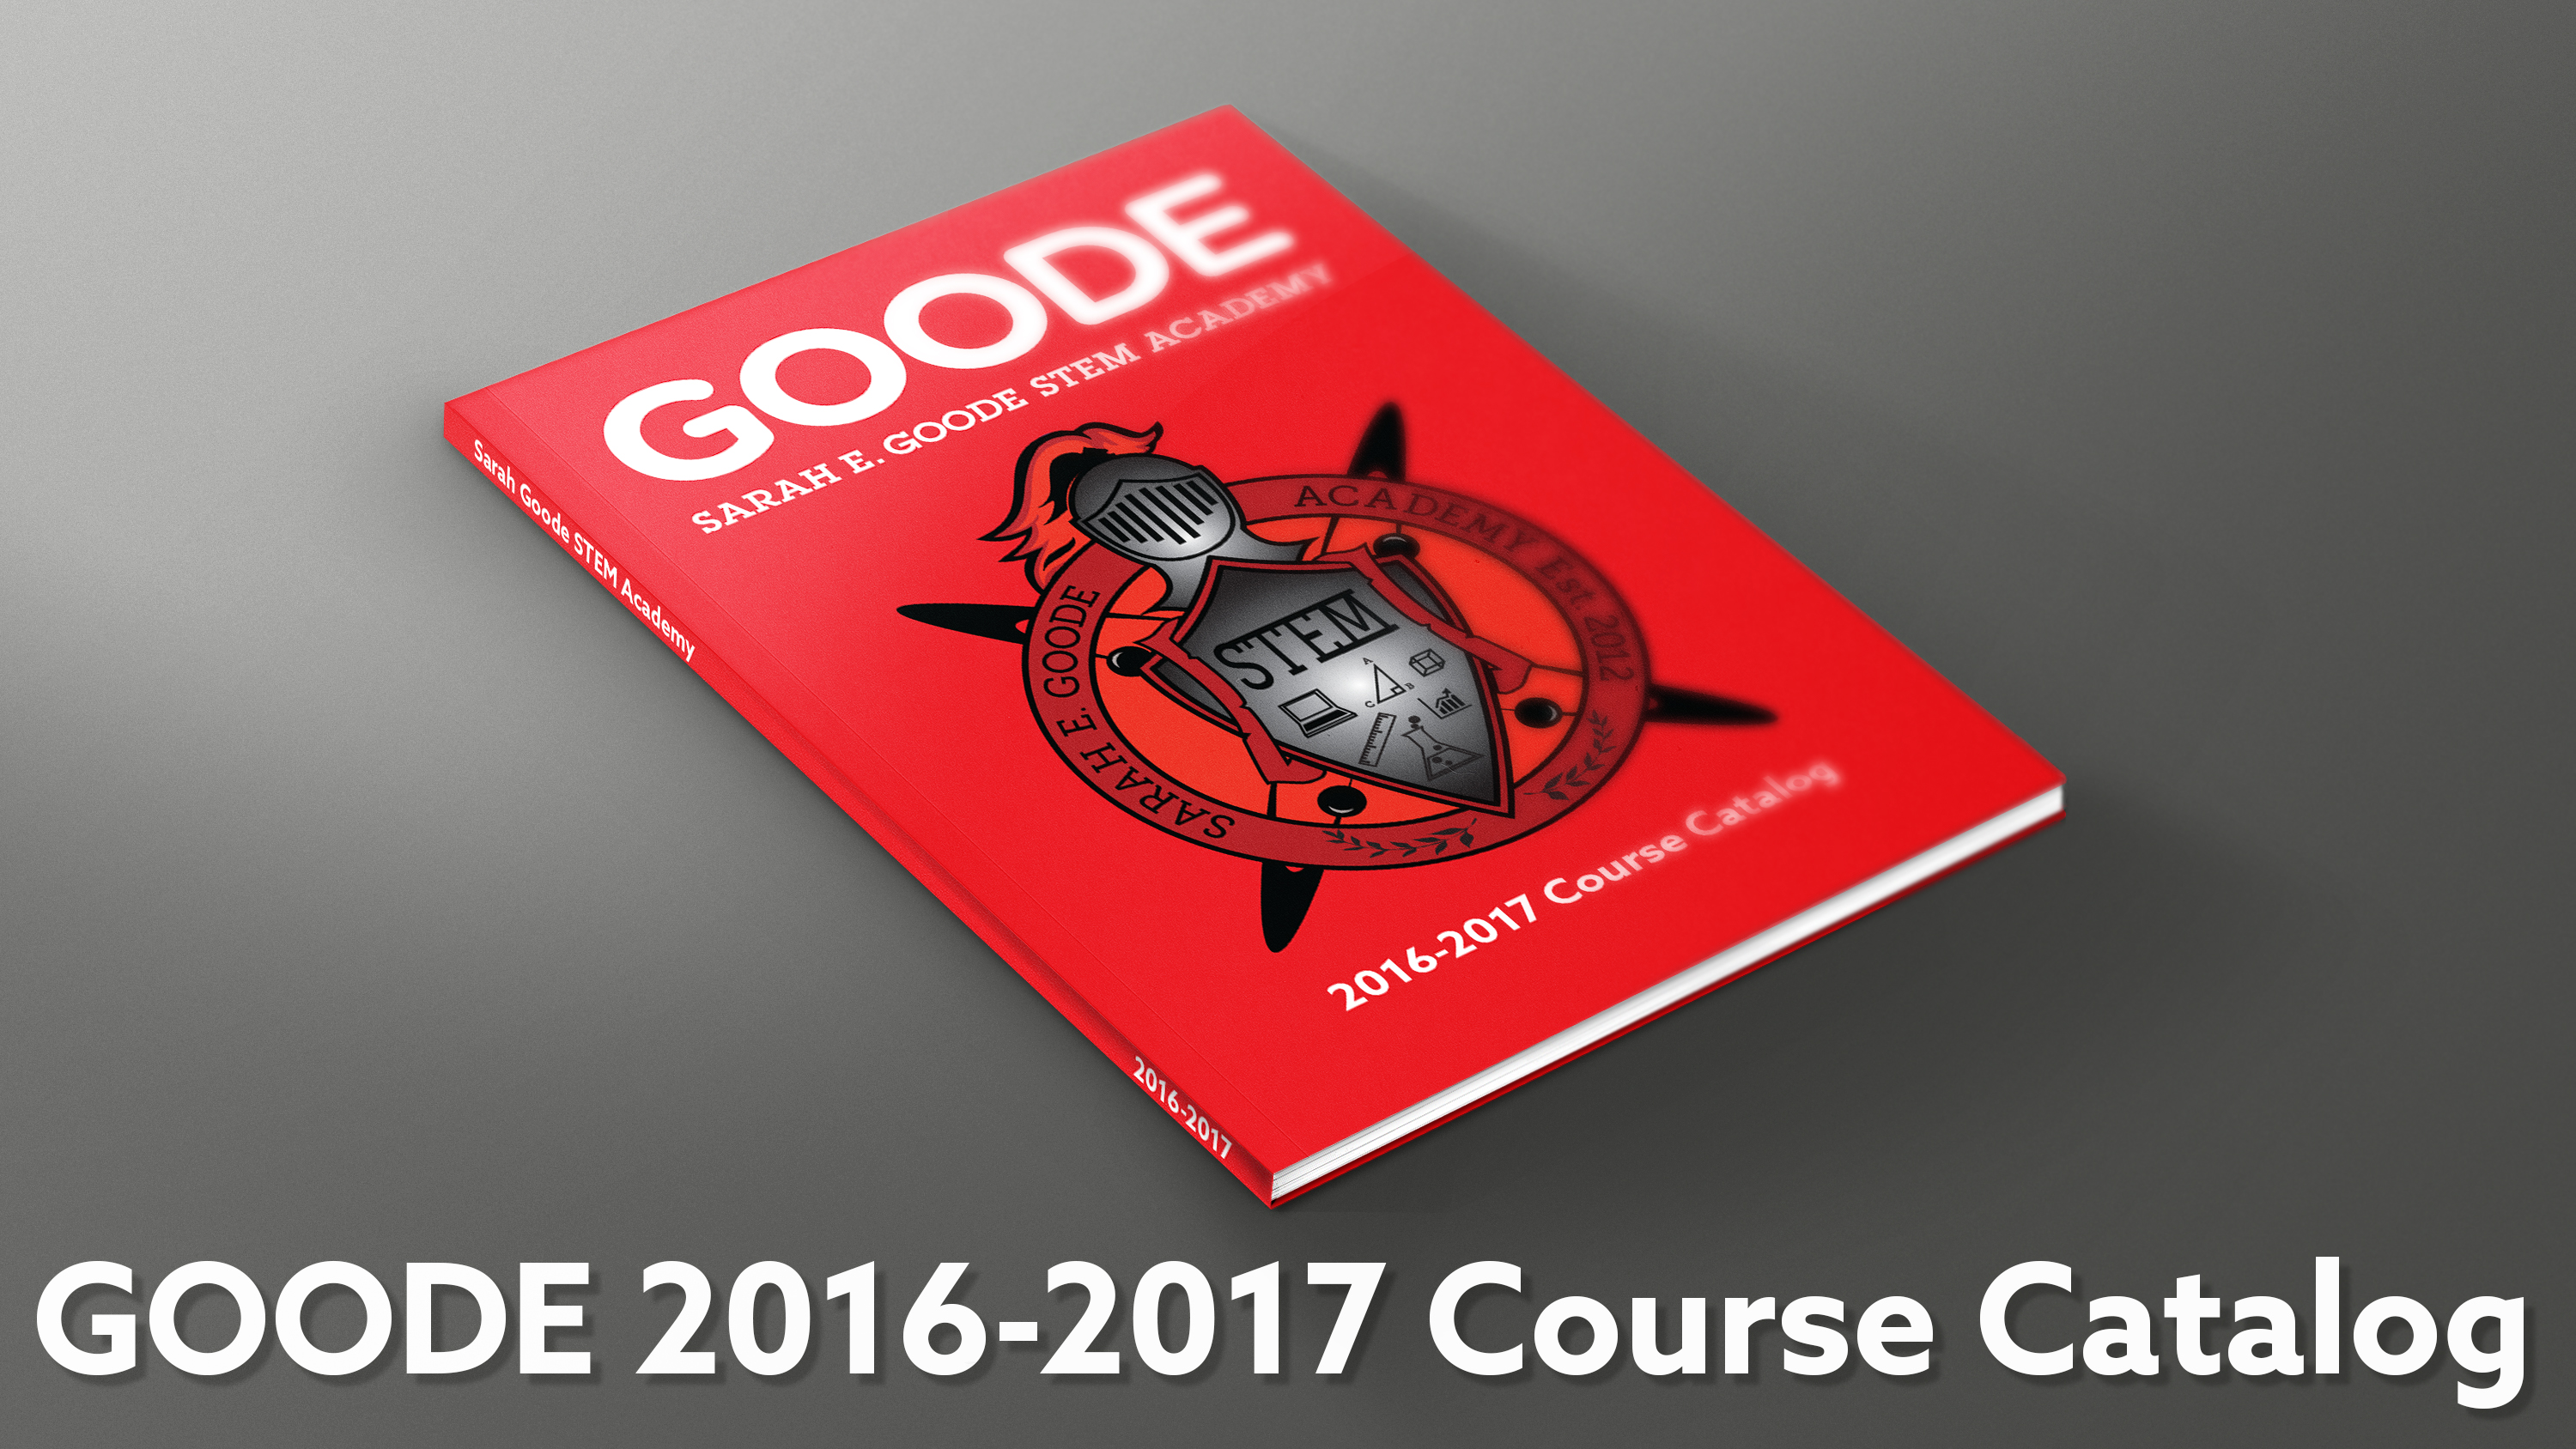 GOODE 2016-2017 Course Catalog Now Available